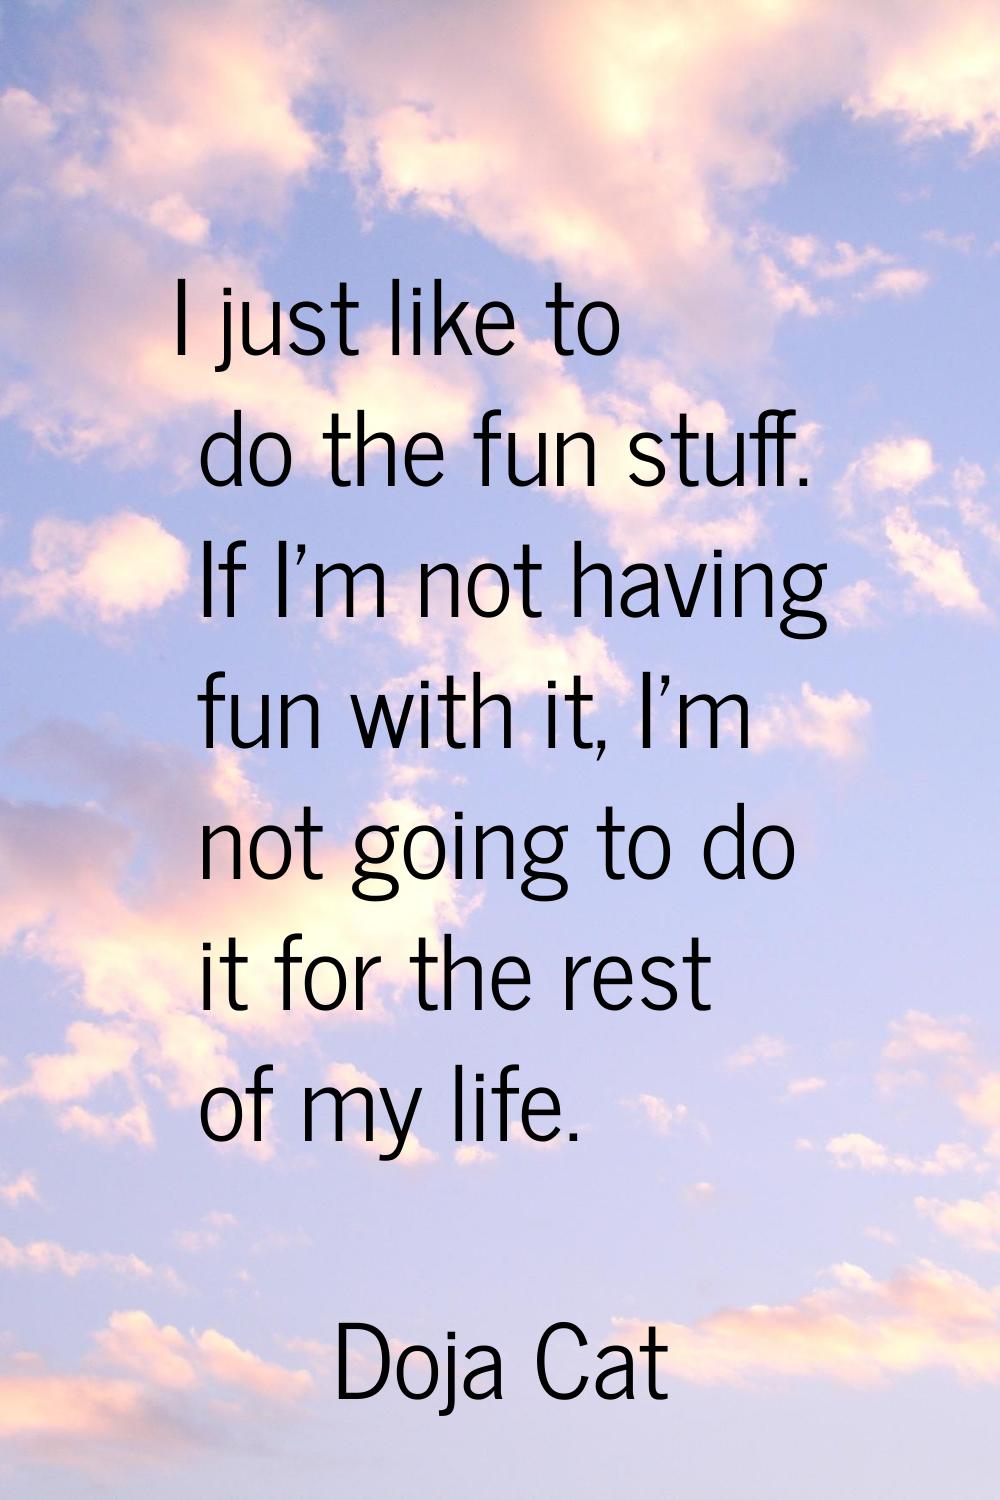 I just like to do the fun stuff. If I'm not having fun with it, I'm not going to do it for the rest